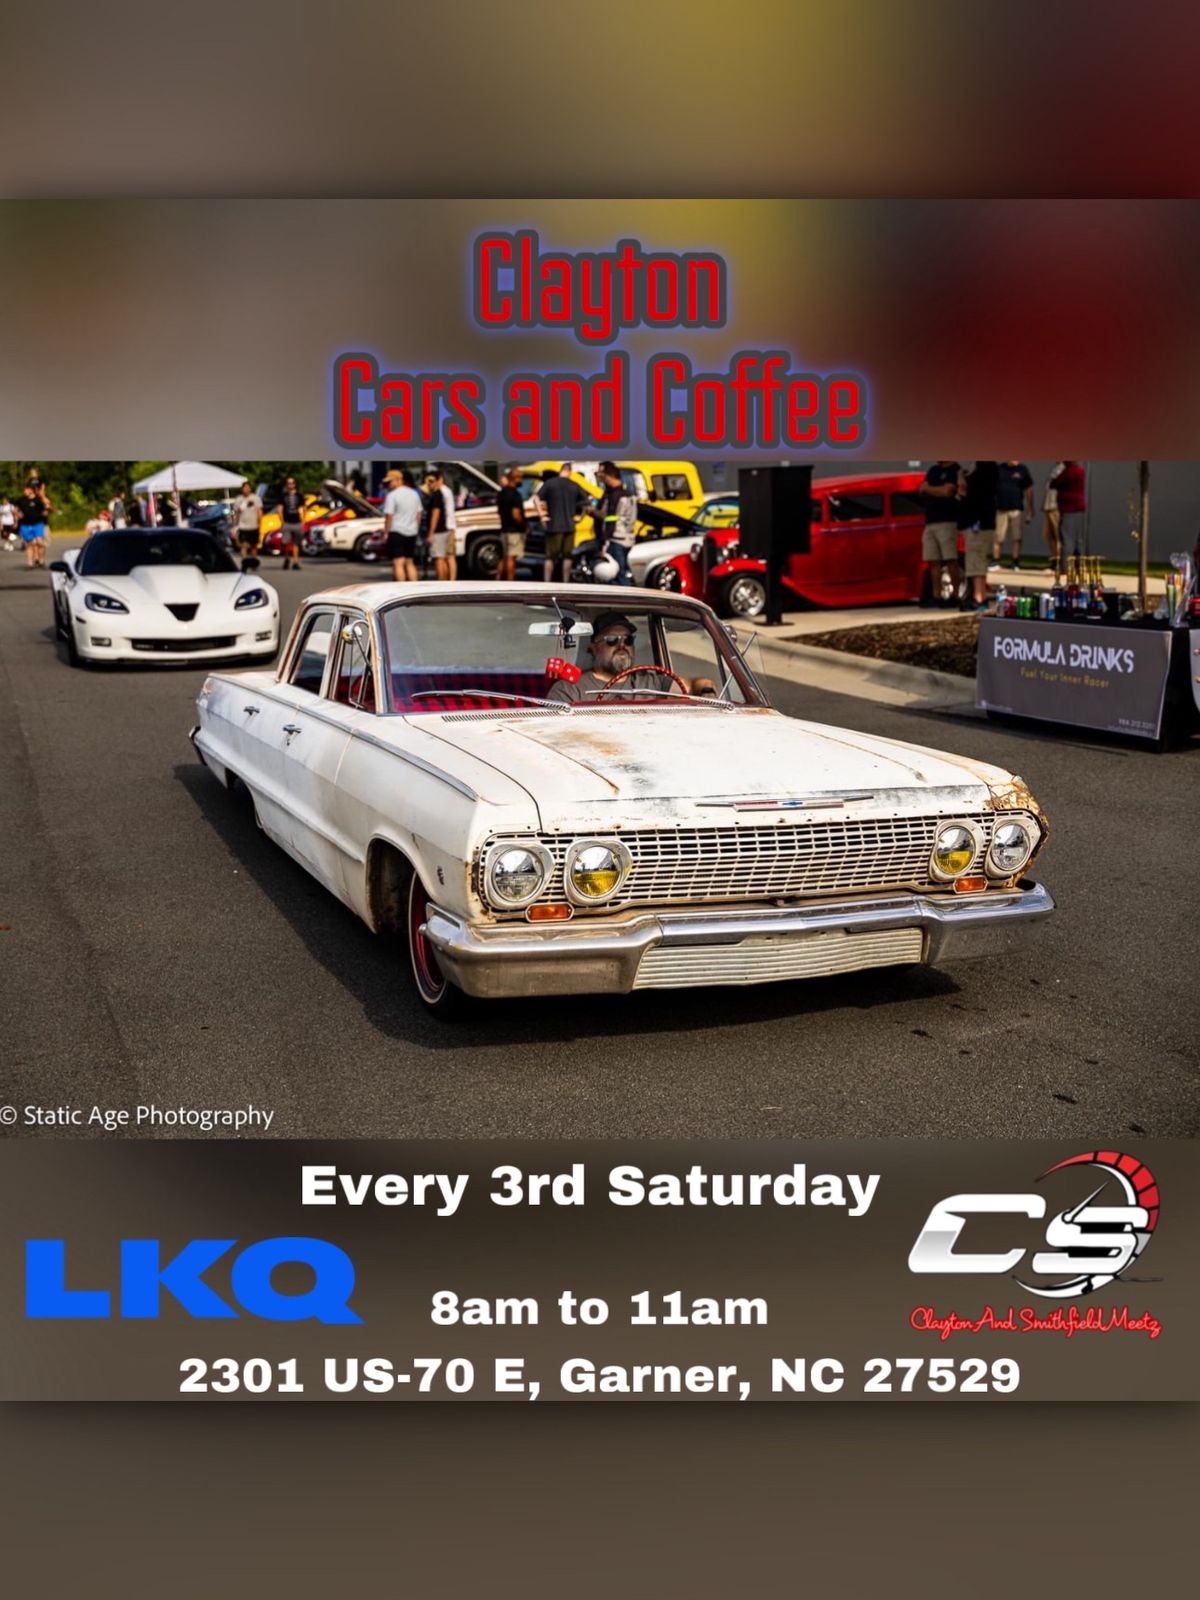 Clayton Cars and Coffee